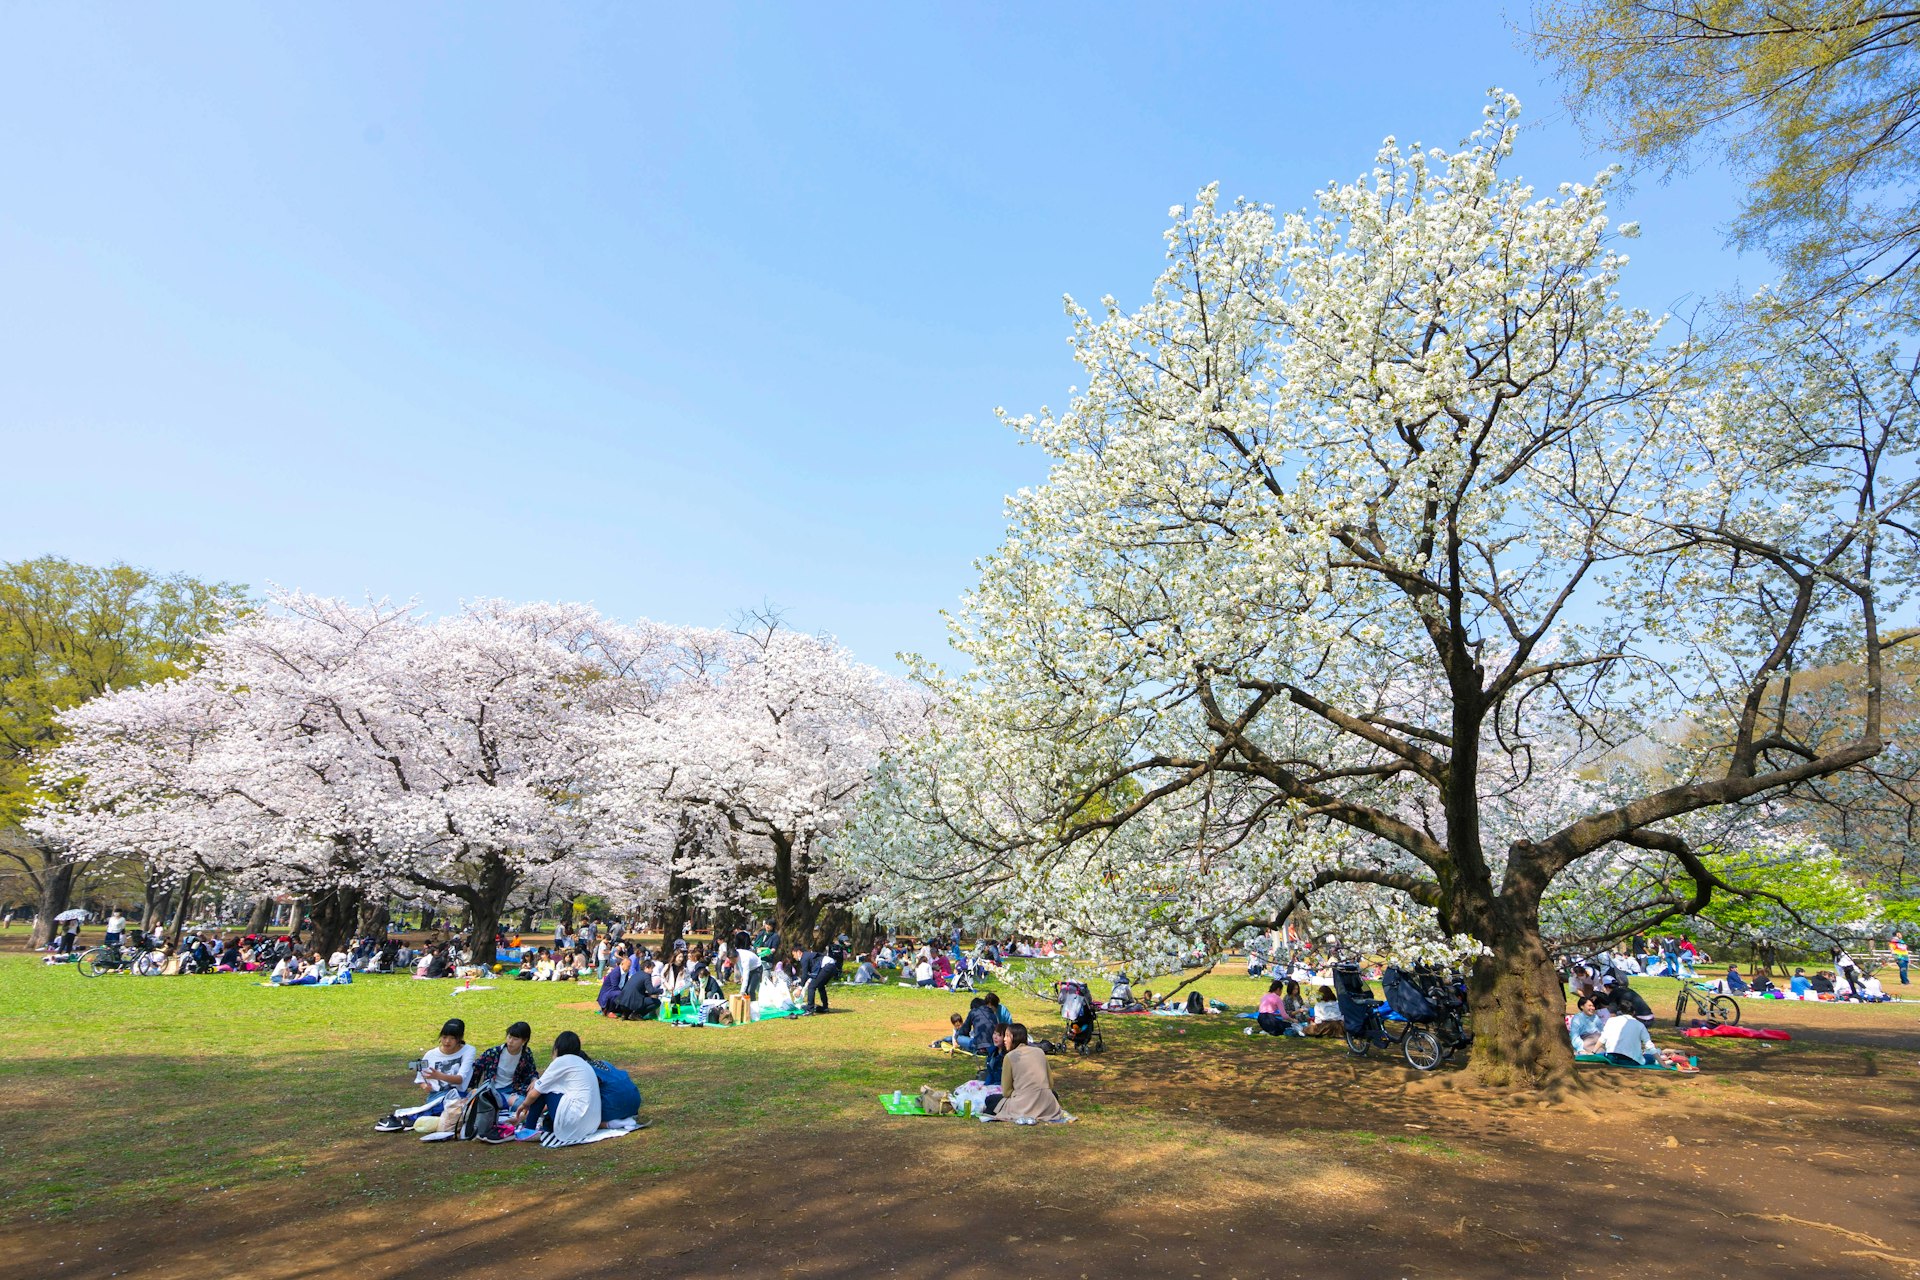 People sit on blankets in a park in Japan under the cherry blossoms. 